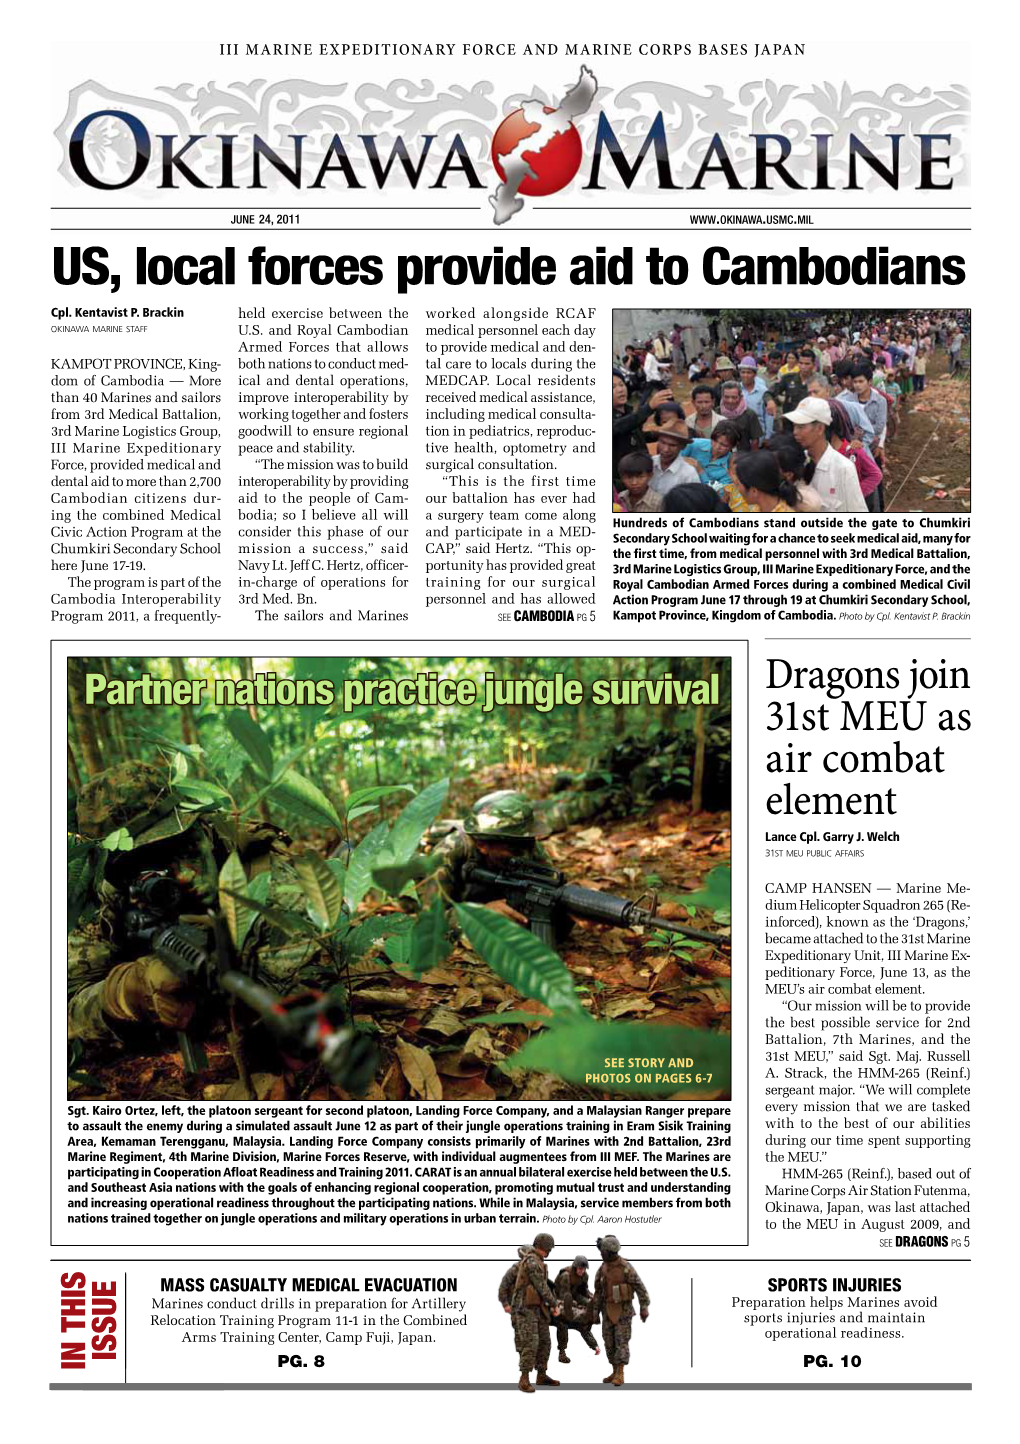 US, Local Forces Provide Aid to Cambodians Cpl